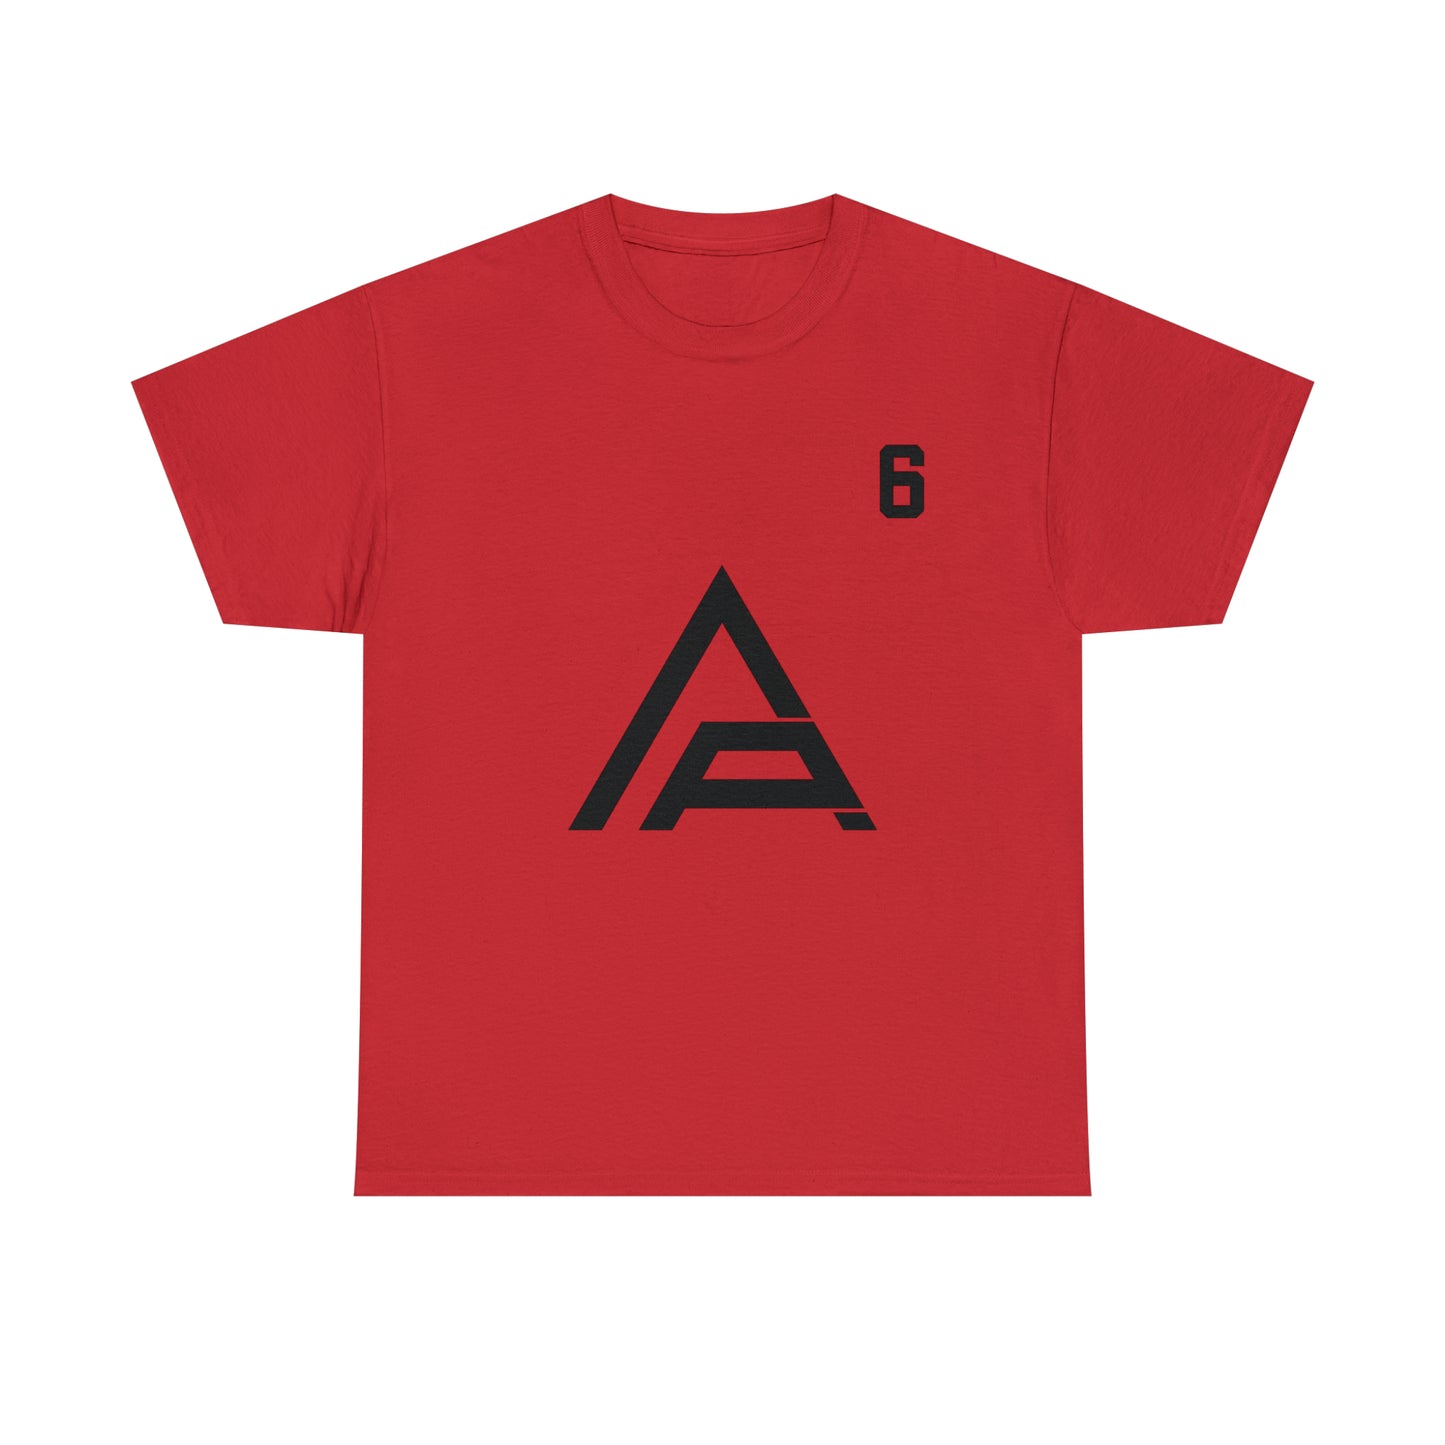 Antonio Patterson Double Sided Tee